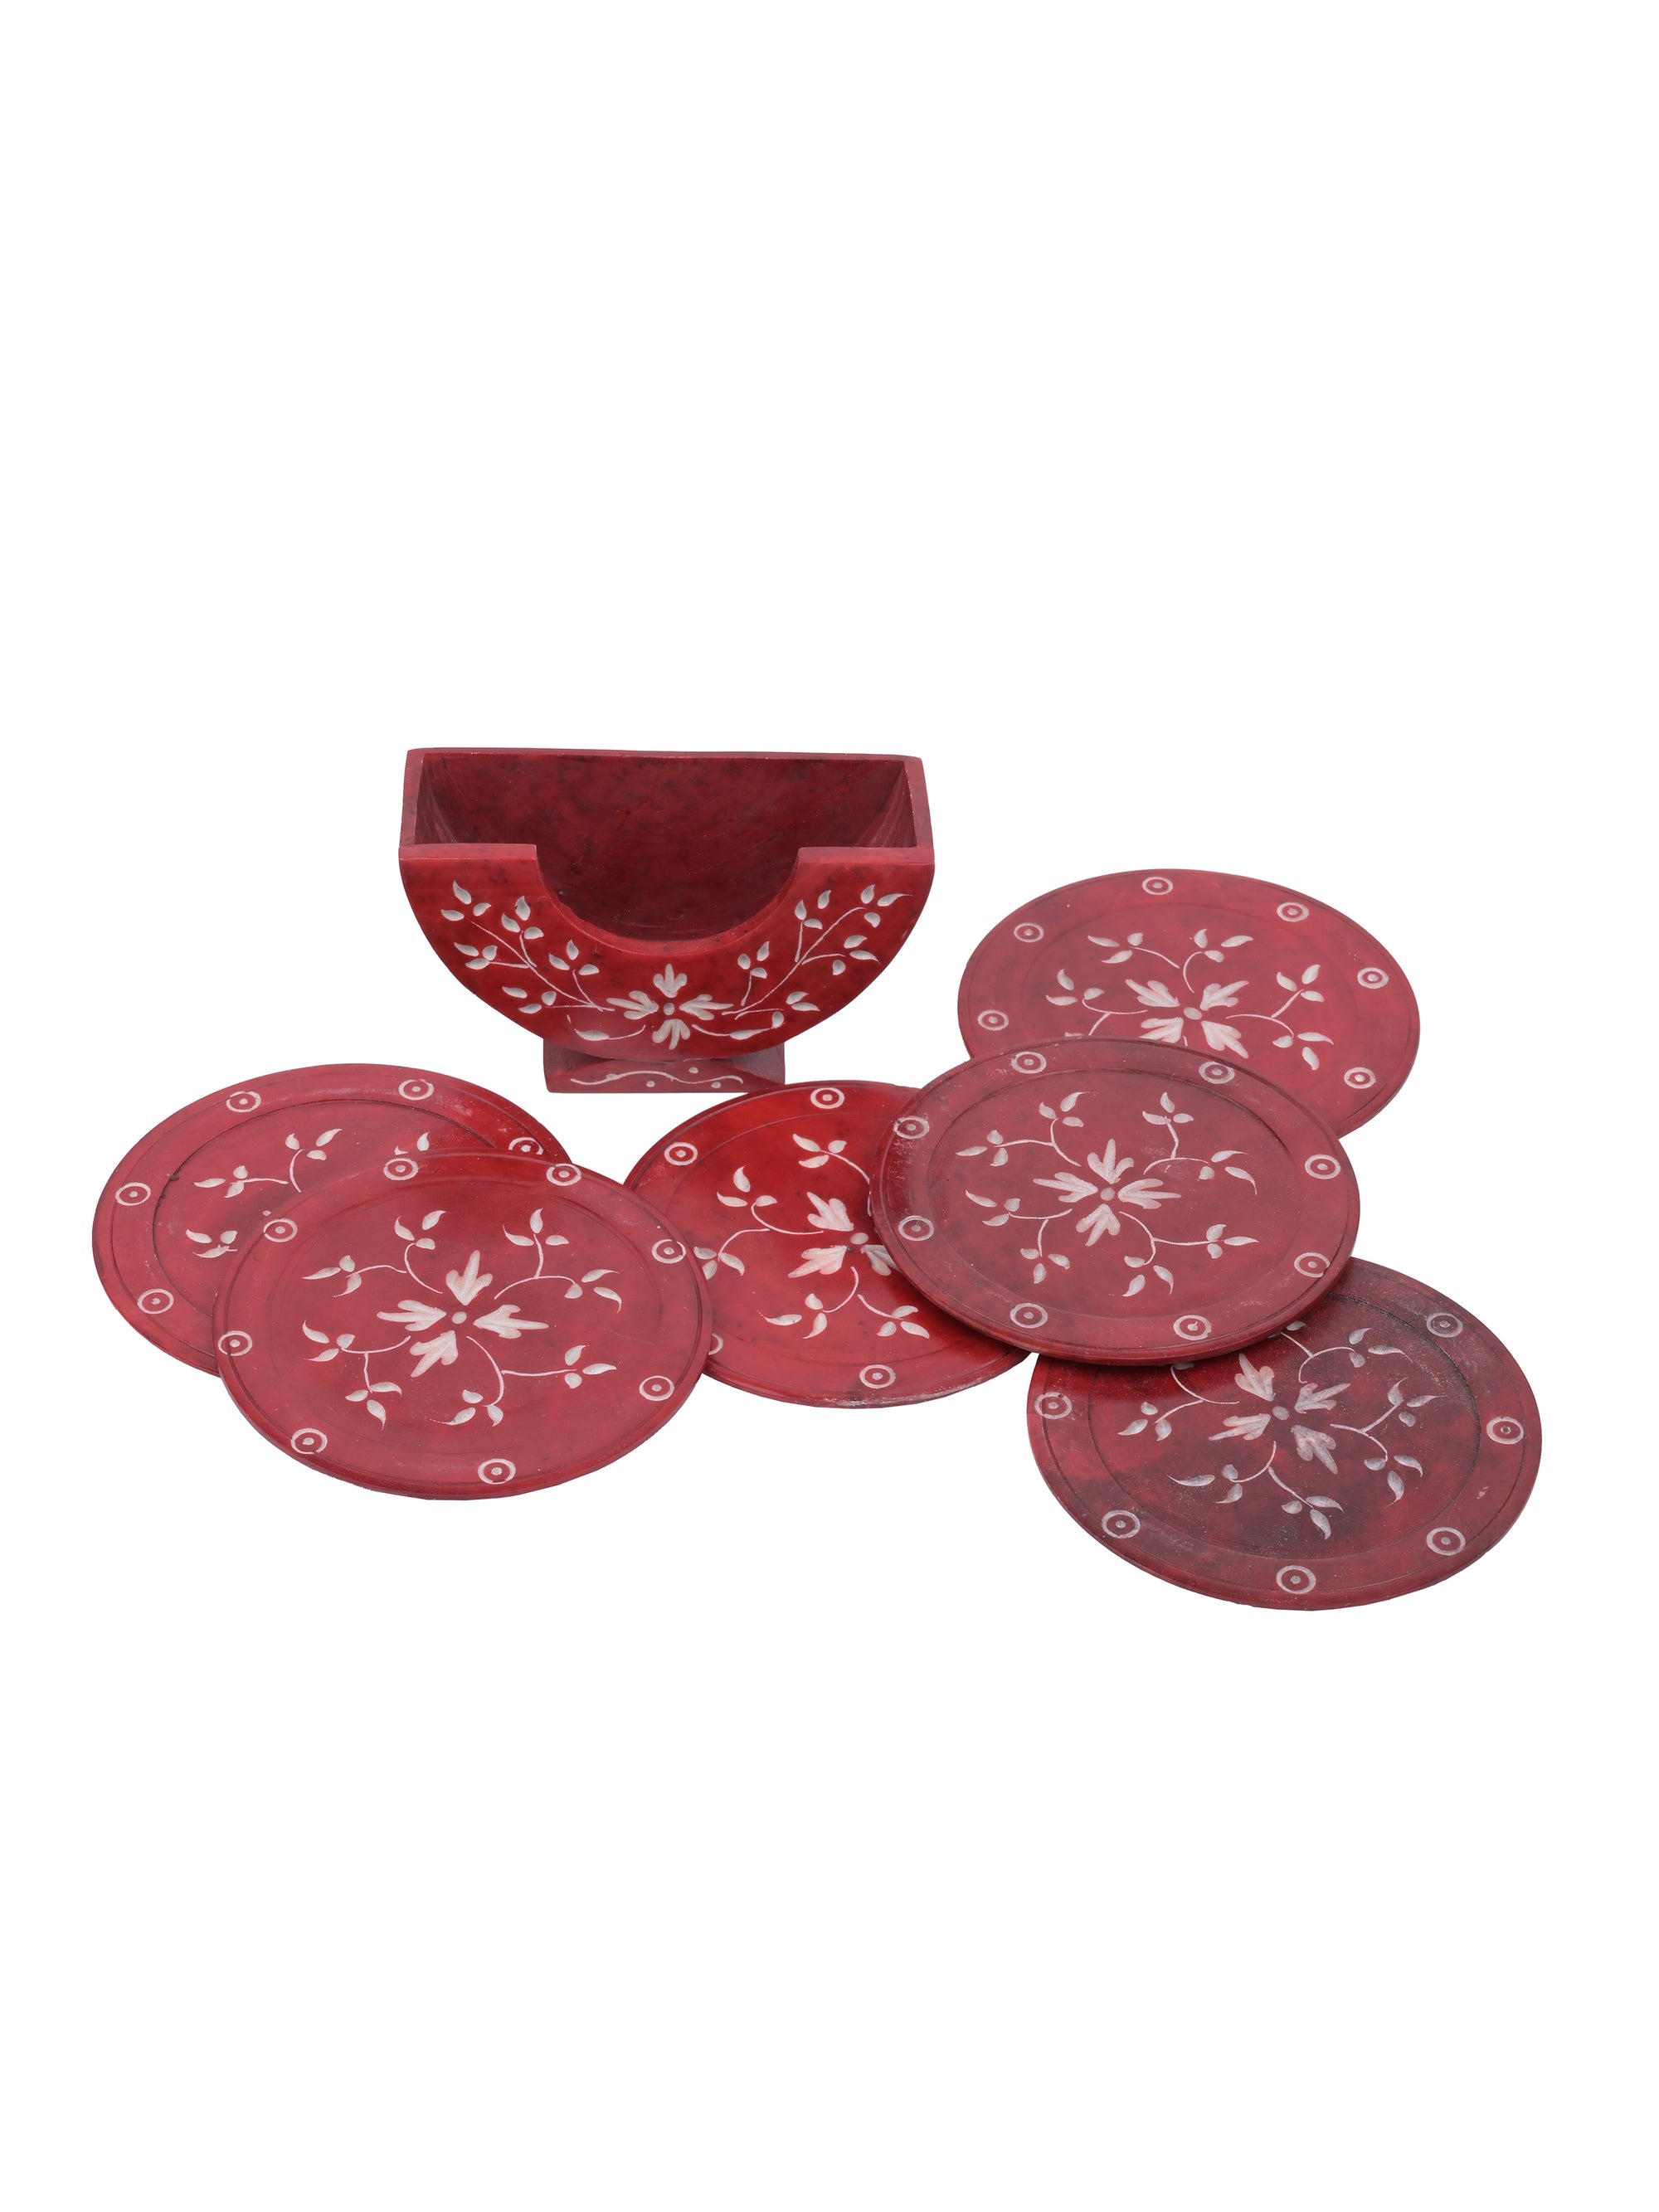 6 pcs hand crafted coaster set with stand made of red soapstone - The Heritage Artifacts